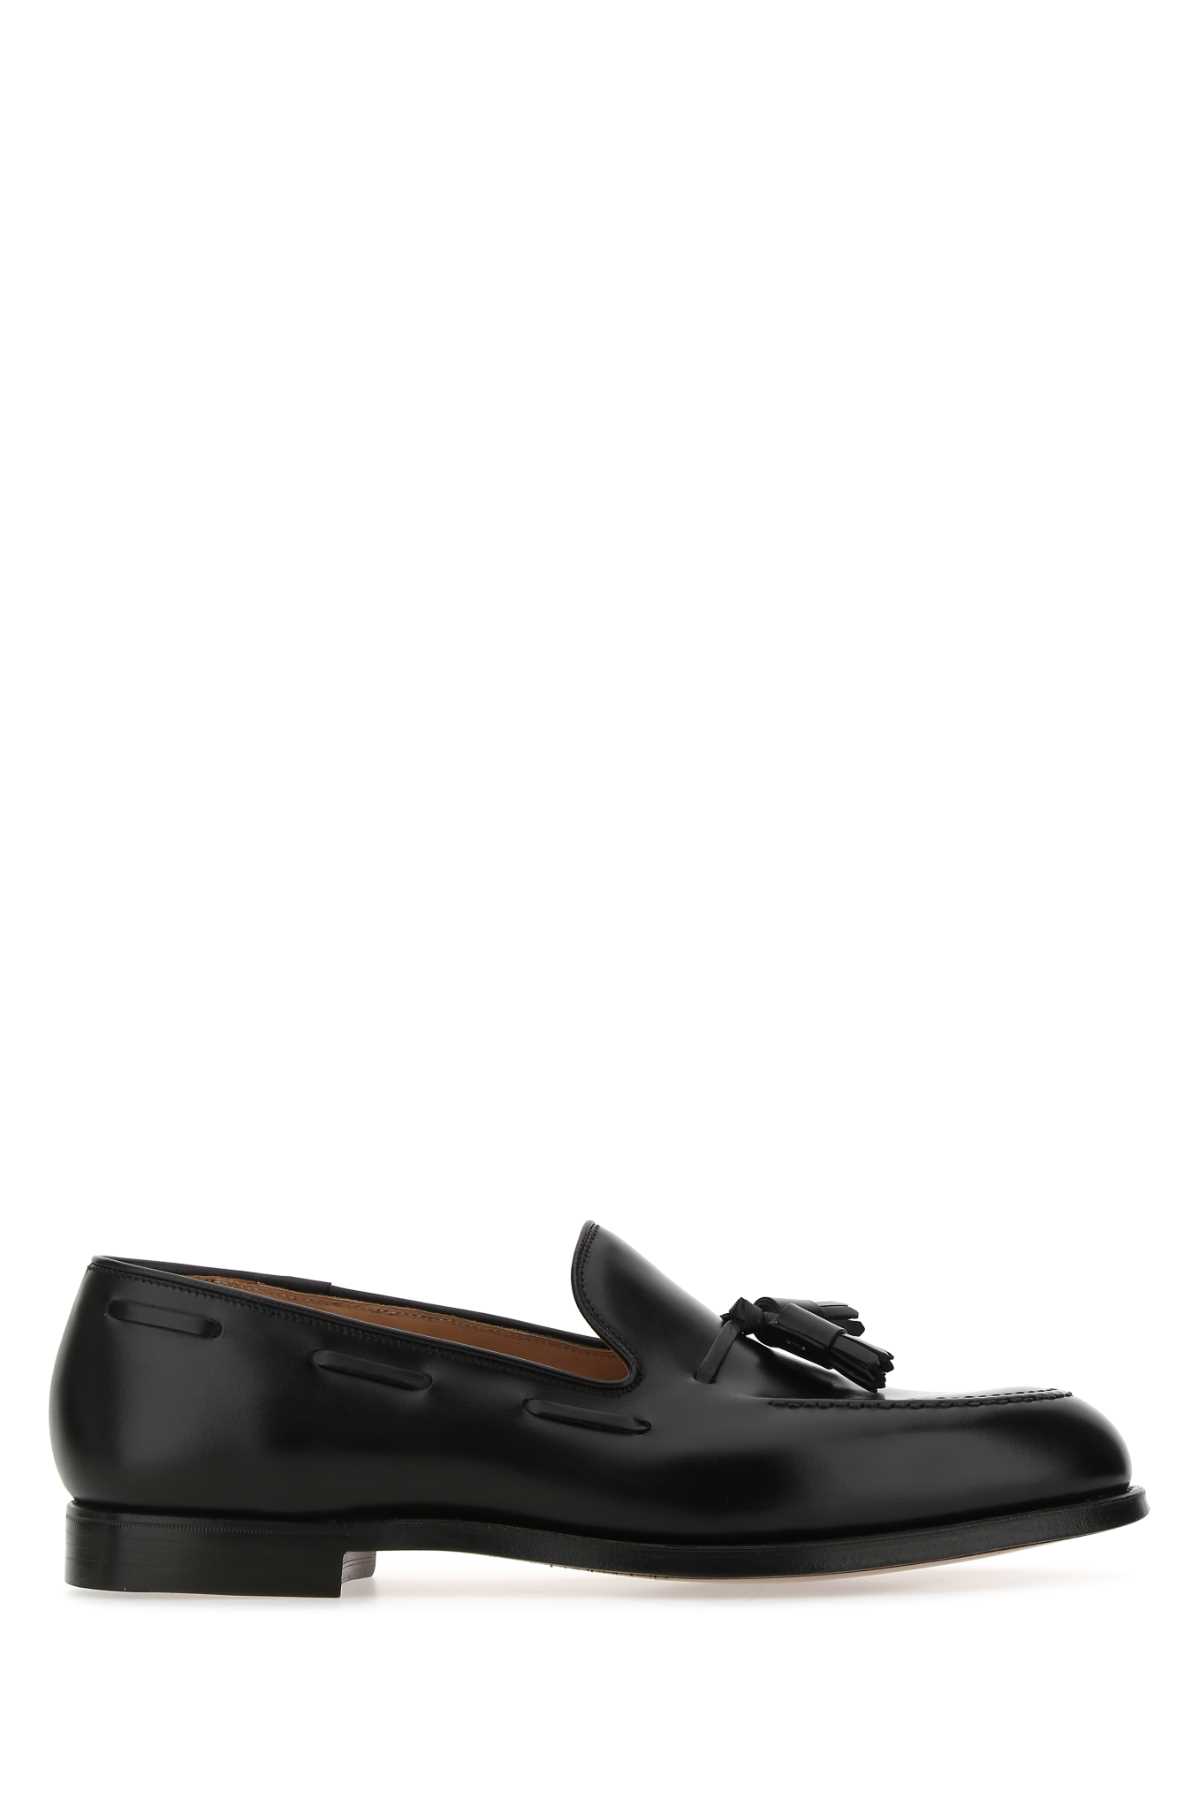 Black Leather Cavendish 2 Loafers